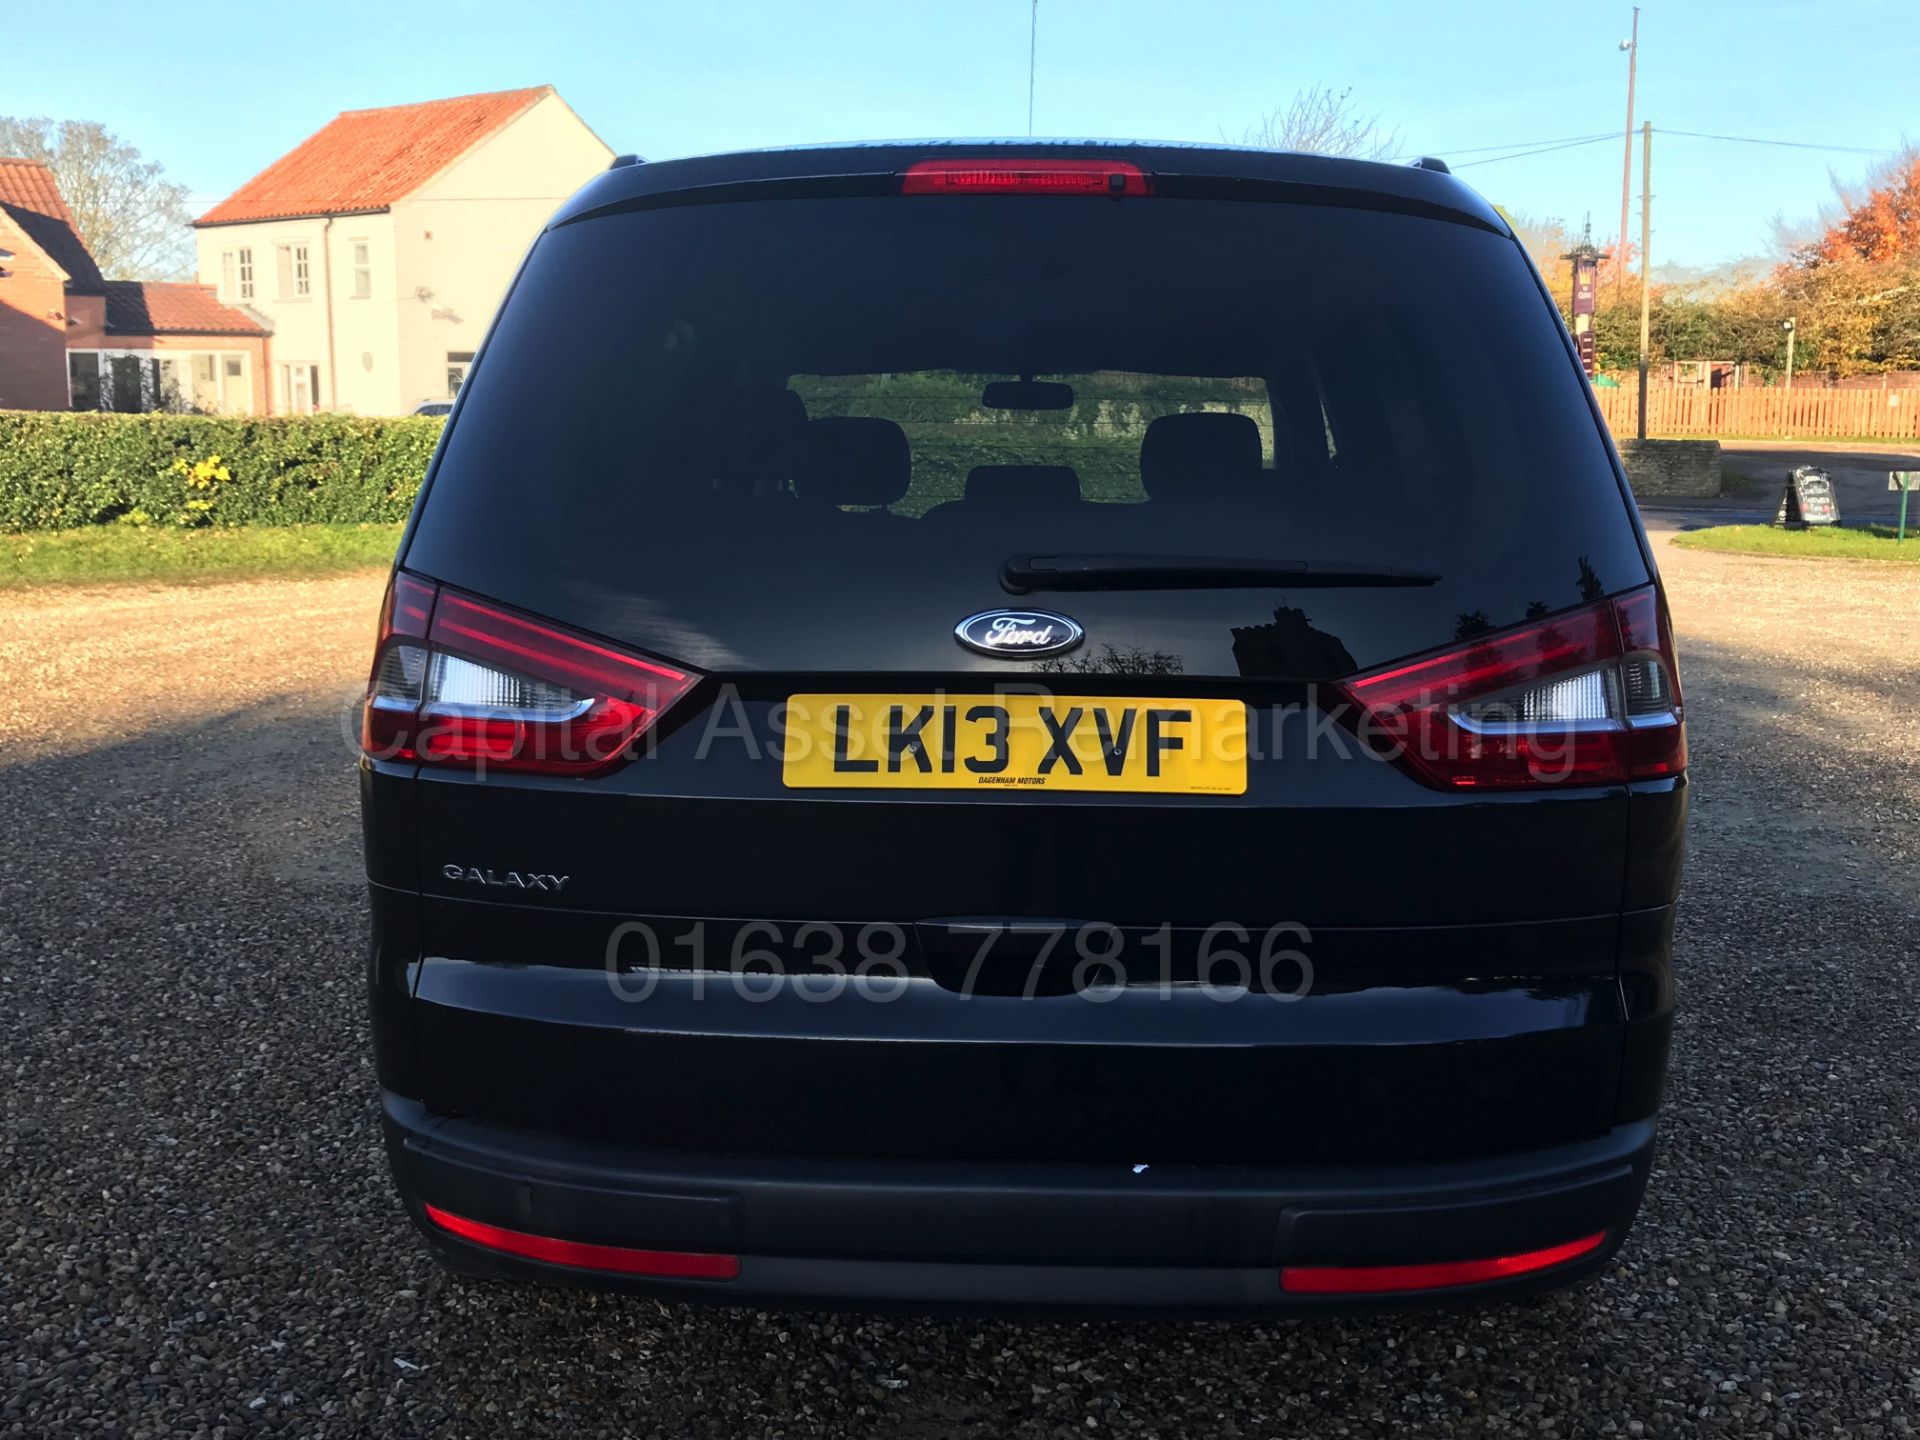 (On Sale) FORD GALAXY 'ZETEC' 7 SEATER MPV (2013) '2.0 TDCI -140 BHP' (1 OWNER) *FULL HISTORY* - Image 9 of 29